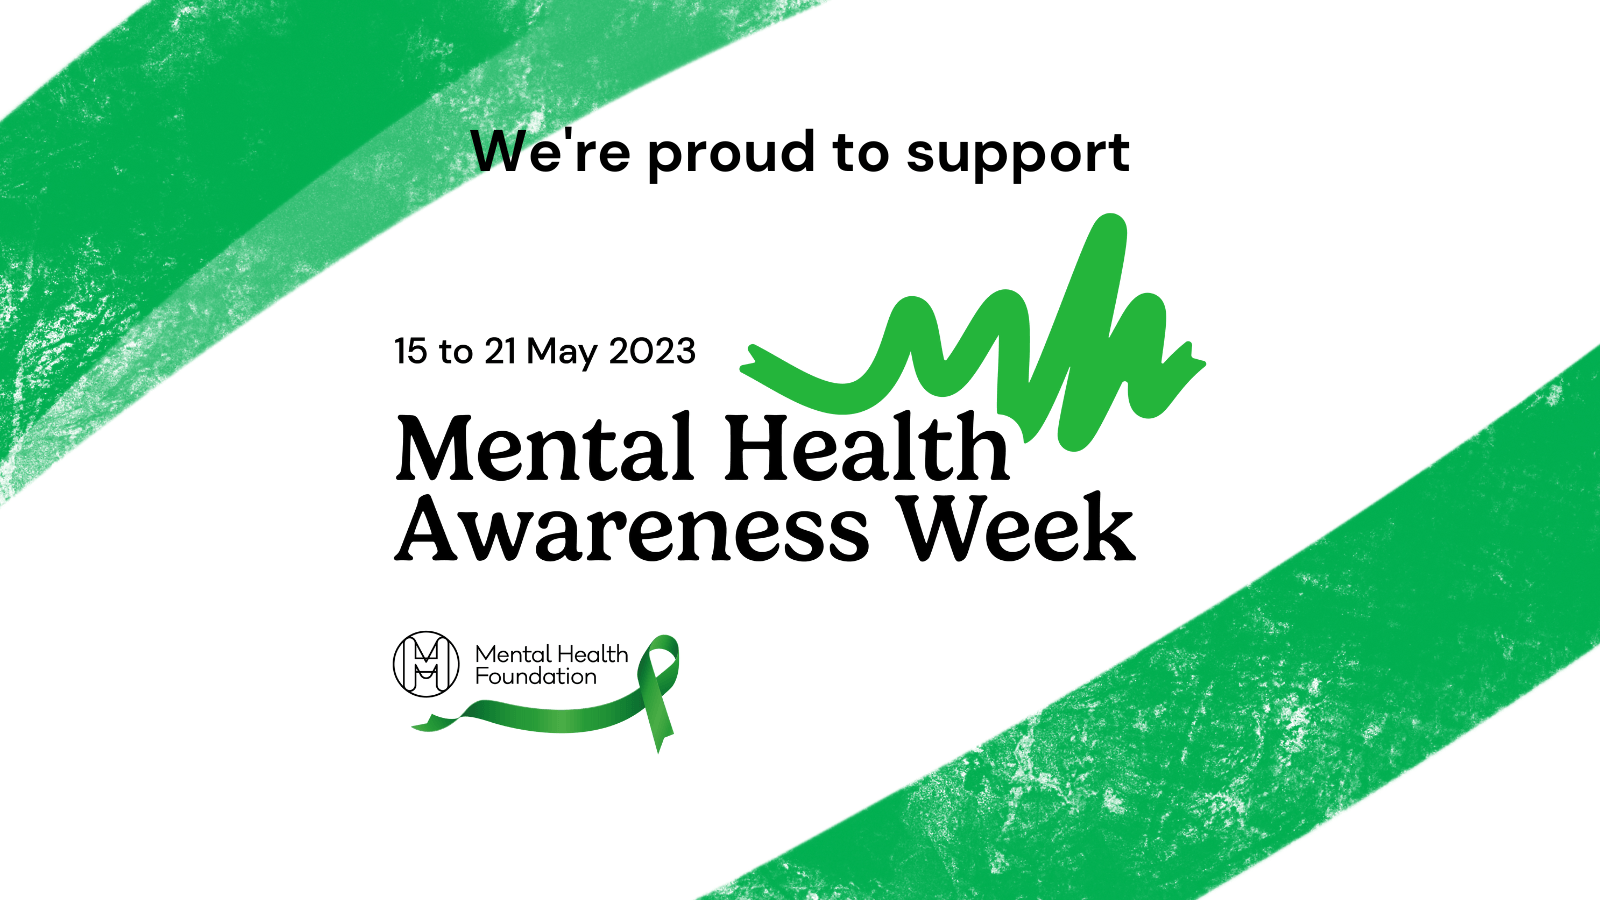 A green and white background with the text: We're proud to support Mental Health Awareness Week, 15-21st May 2023